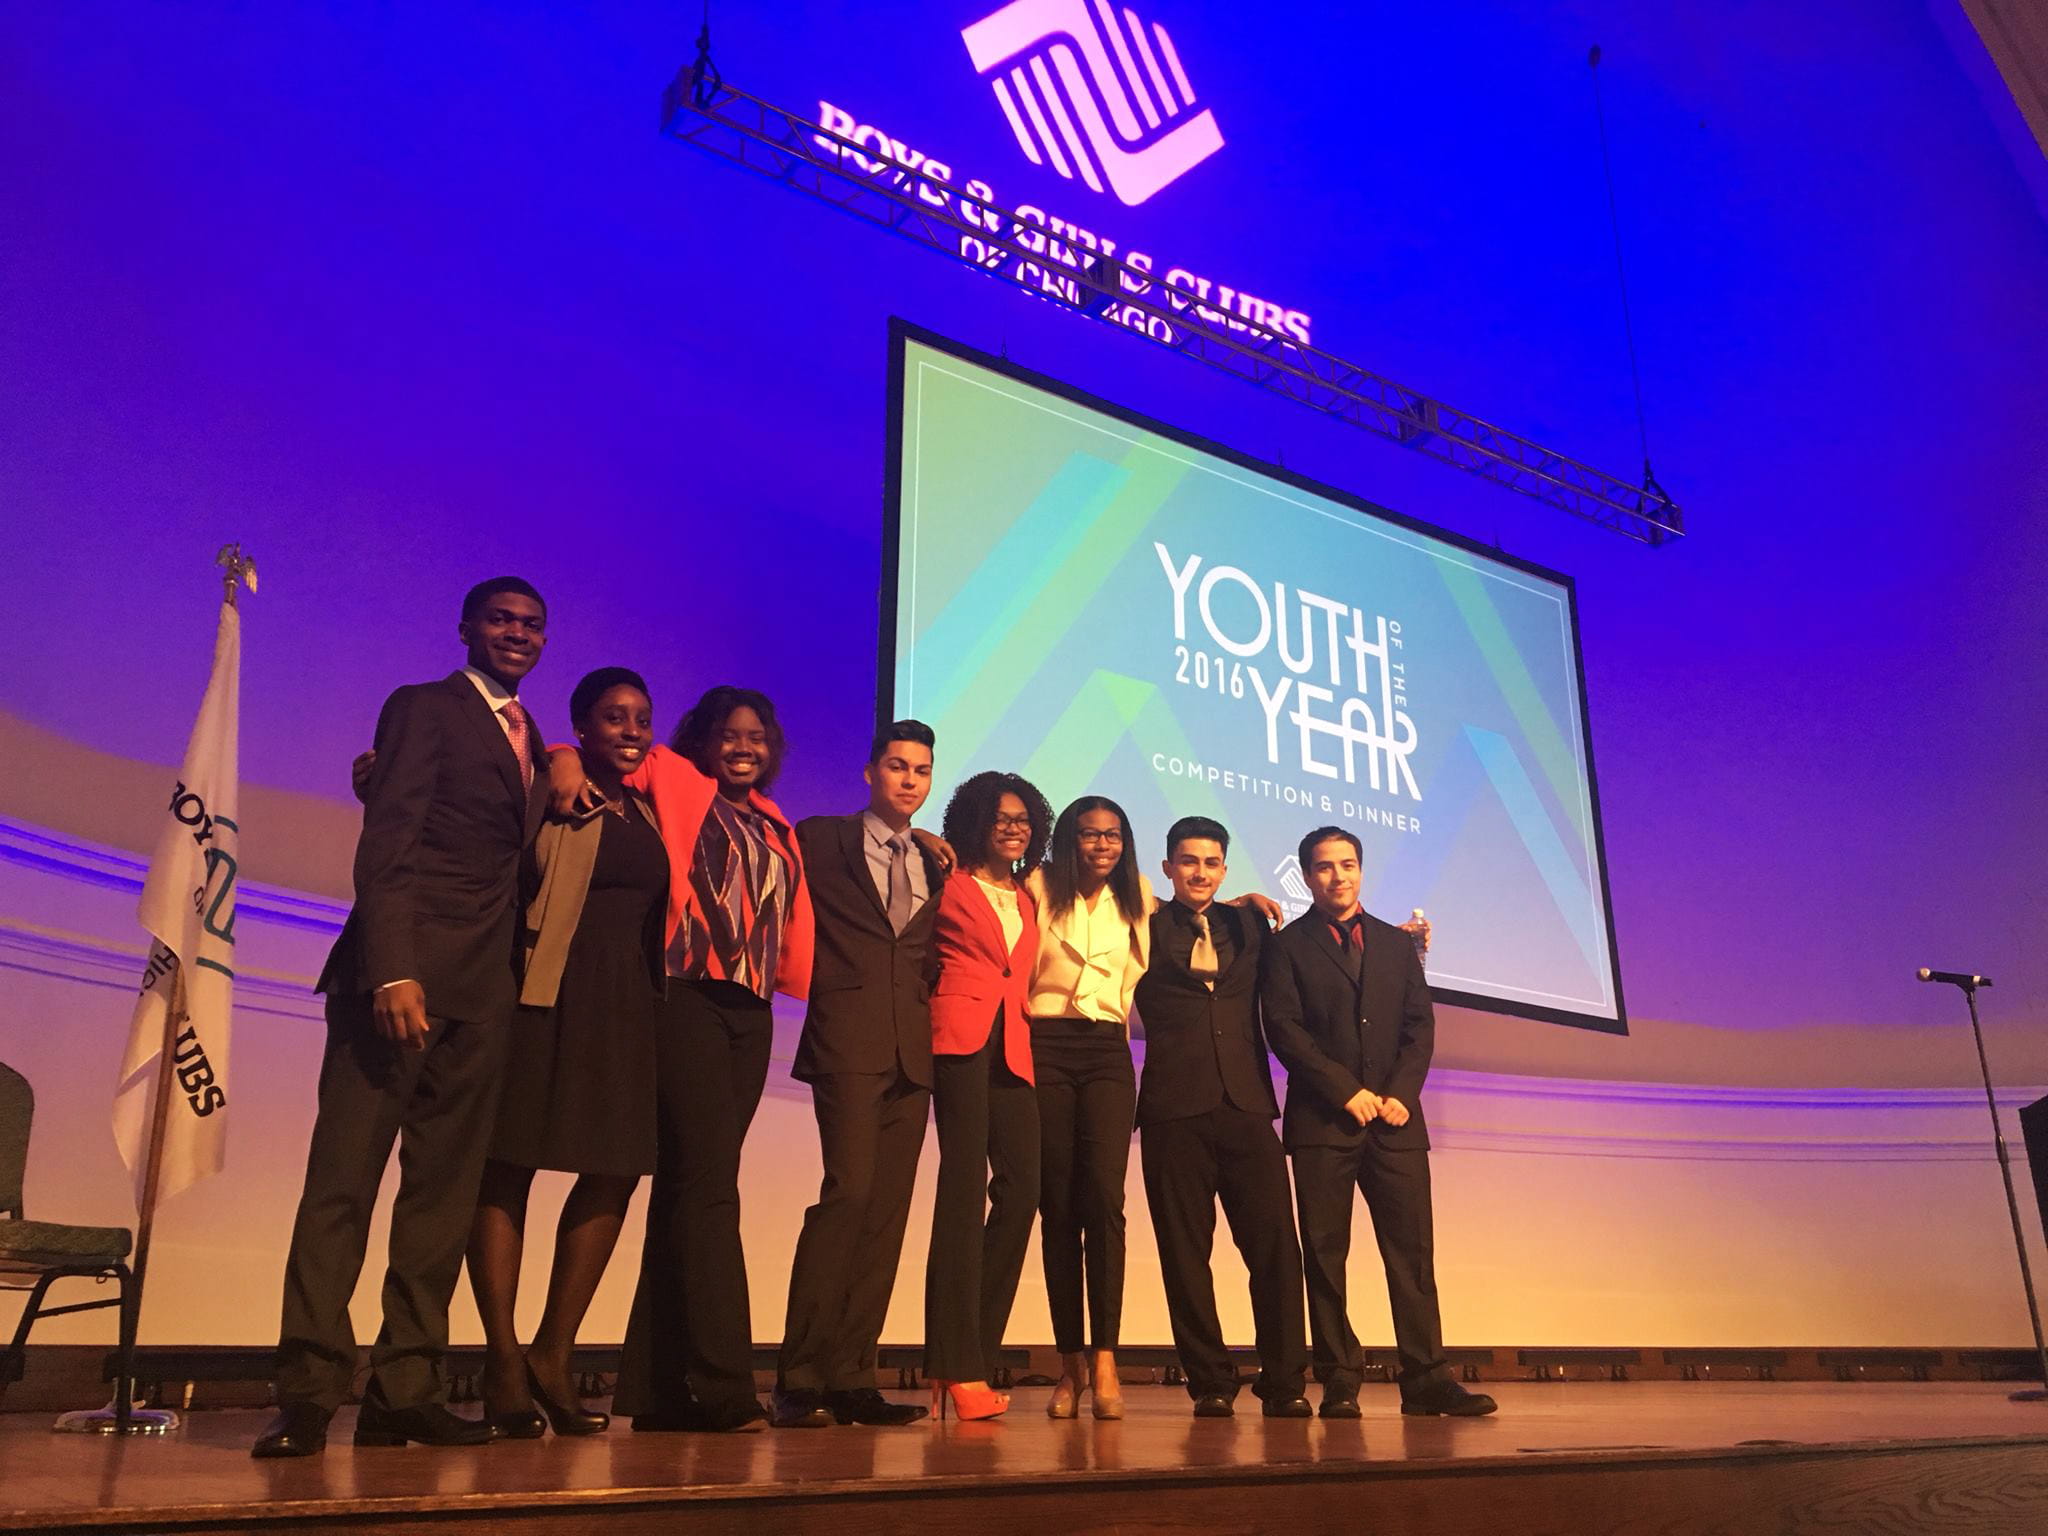 Student Named Runner Up in Boys & Girls Clubs of Chicago’s 2016 Youth of the Year Competition - student-named-runner-up-in-boys-and-girls-clubs-of-chicagos-2016-youth-of-the-year-competition